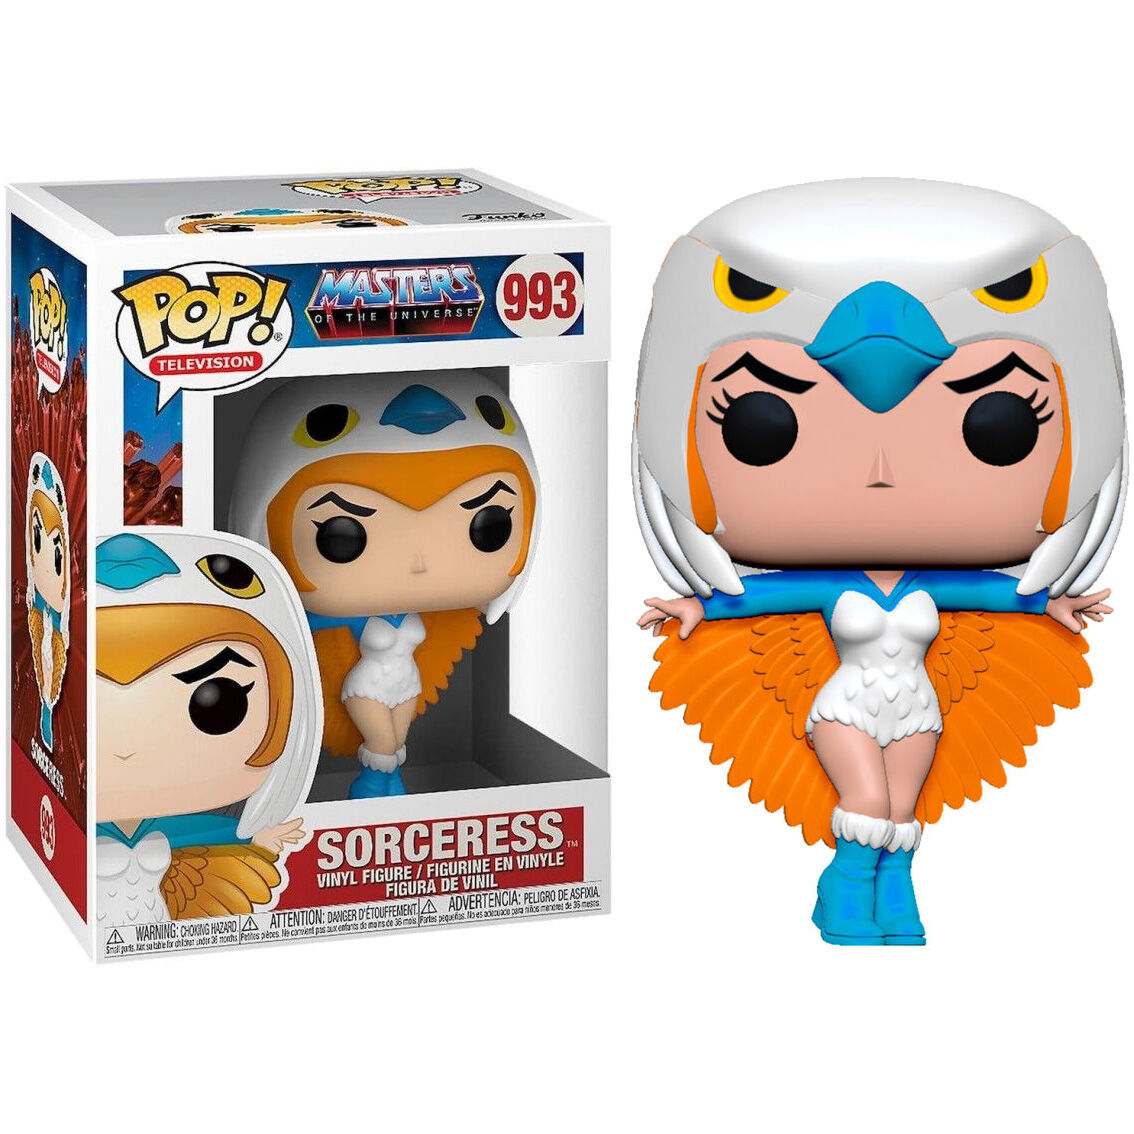 POP! Masters of the universe - Sorceress - 993